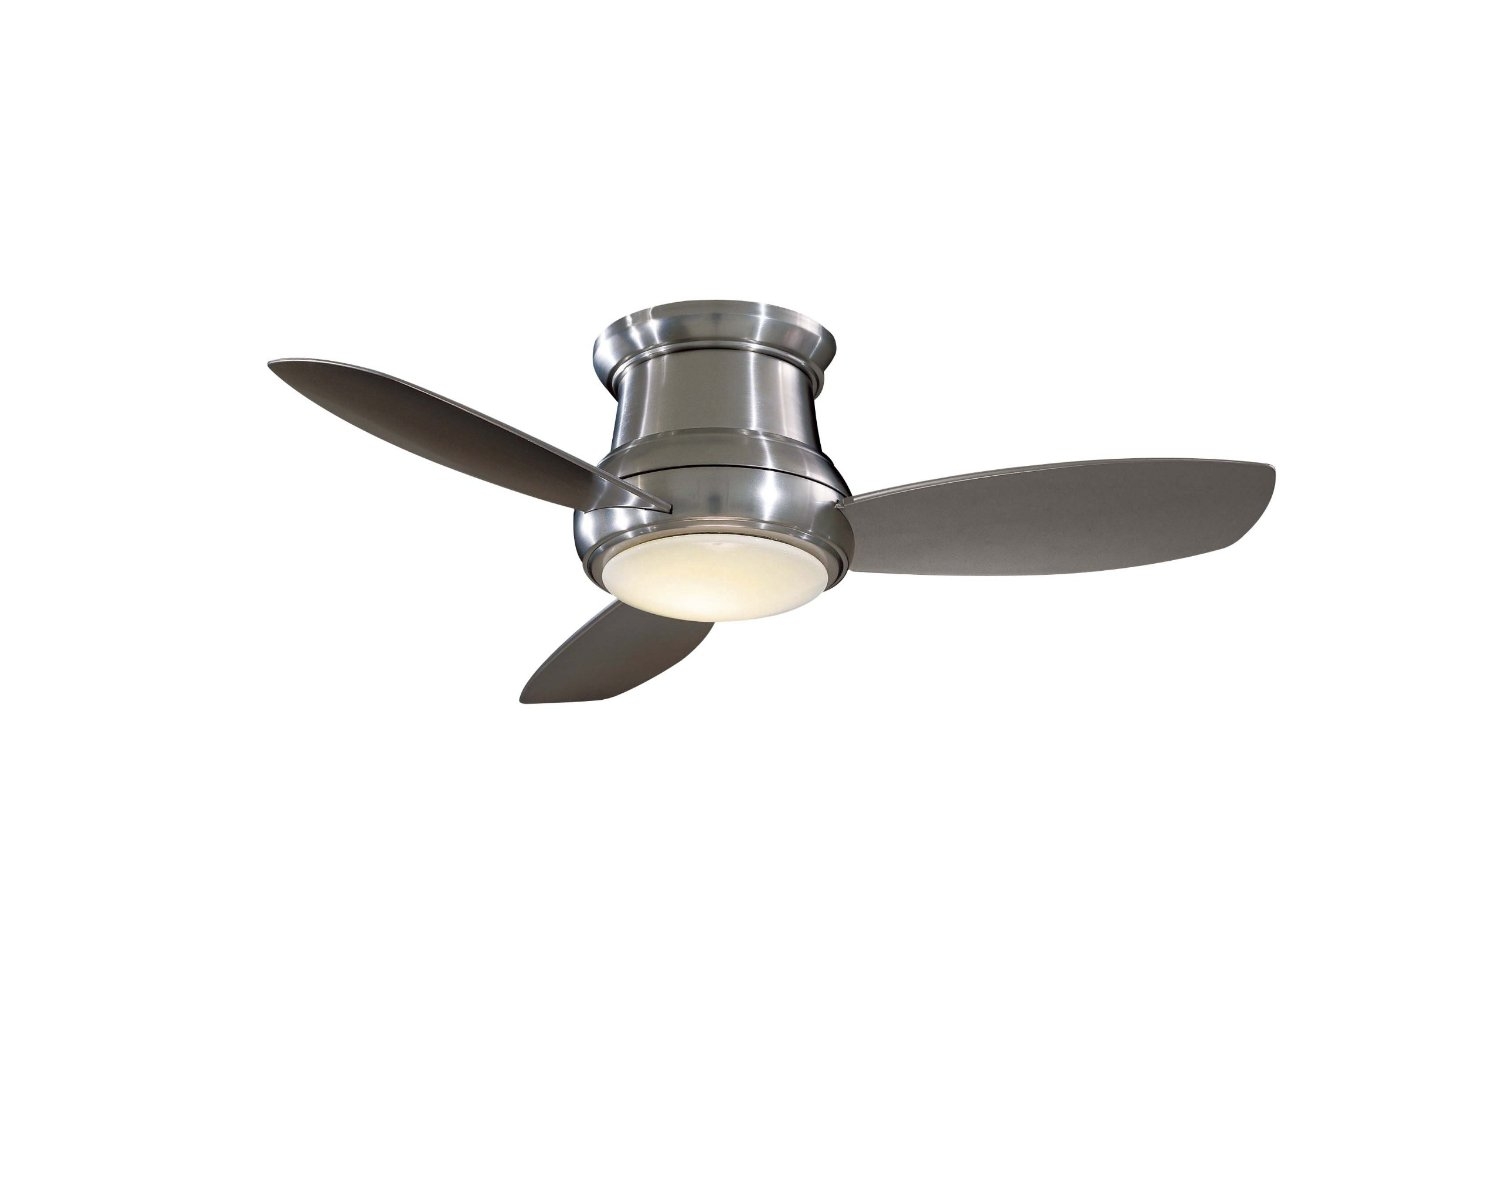 Small Hugger Ceiling Fans With Light